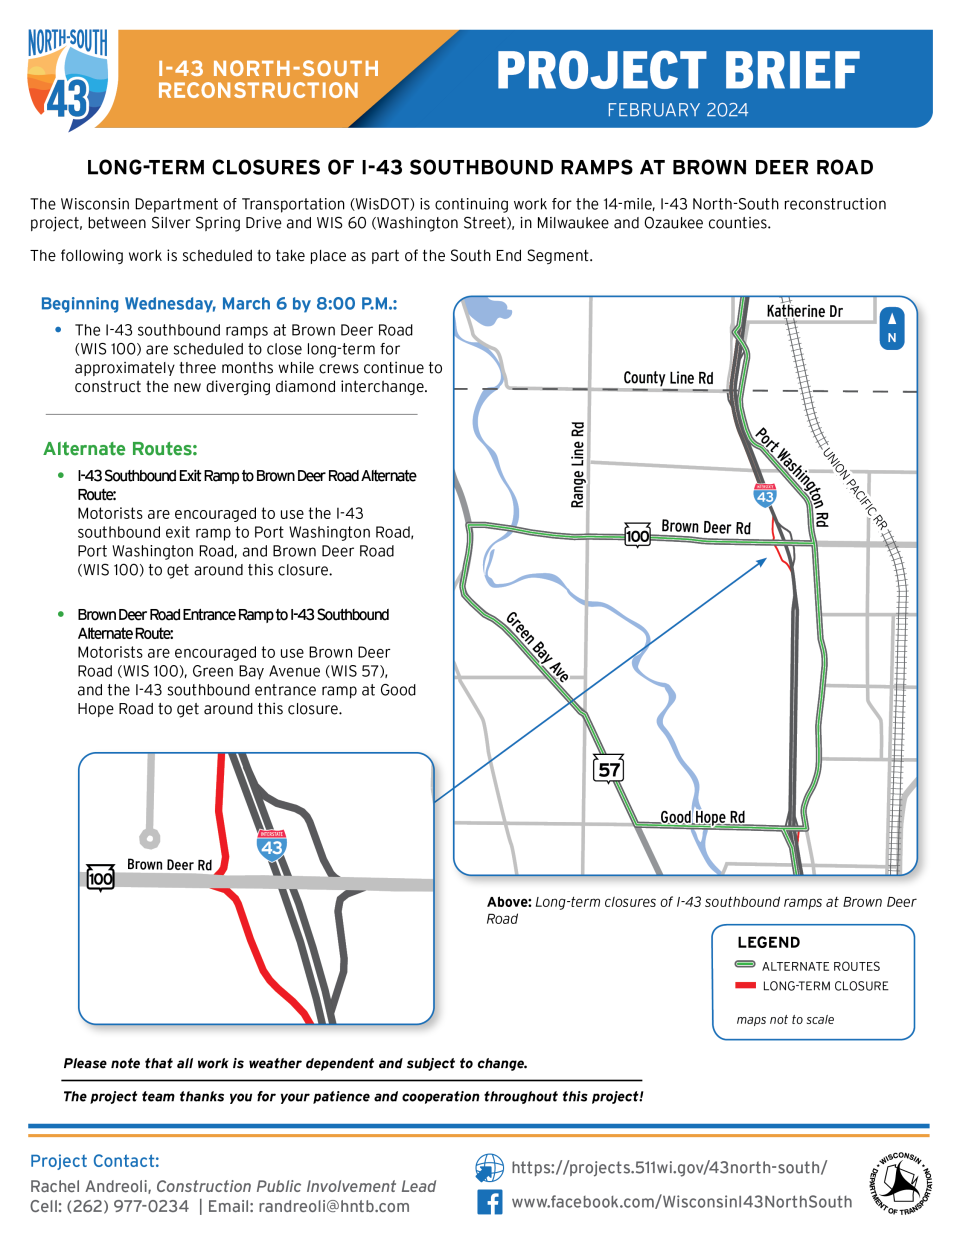 A WisDOT project brief showing where the closures will be at the I-43 southbound ramps on Brown Deer Road, as well as alternative routes. The ramps will be closed for approximately three months, beginning Wednesday, March 6.